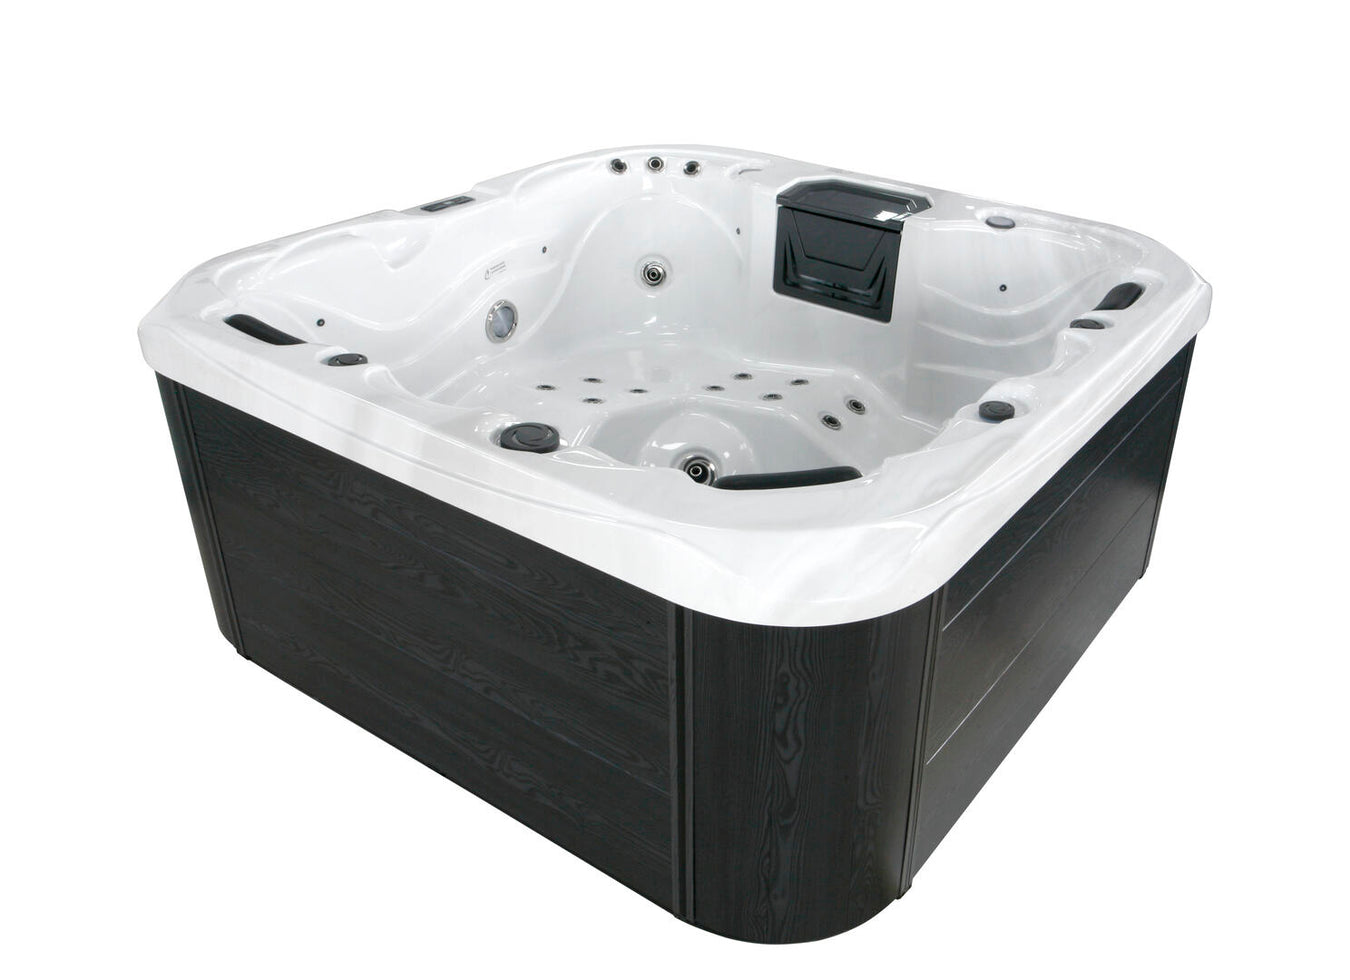 Luxury 5 person and 6 person Hot Tubs - Gardens Of Style